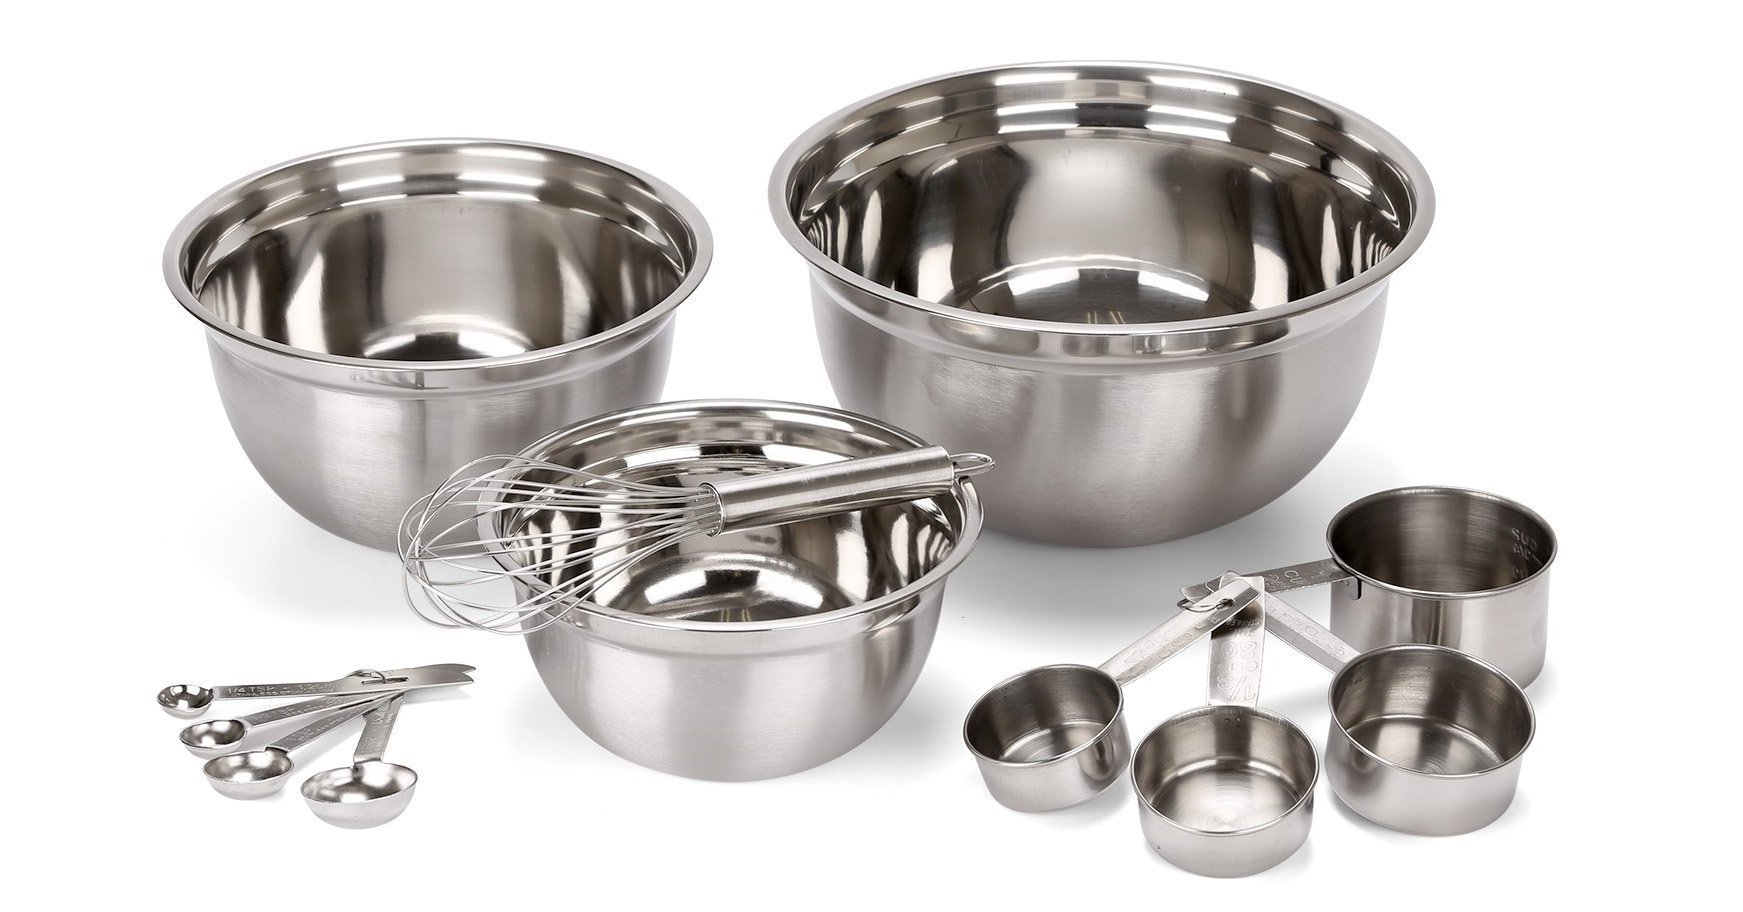 Amazon: 12 Piece Stainless Steel Mixing Bowls + Measuring Cups & Spoons Only $11.63!